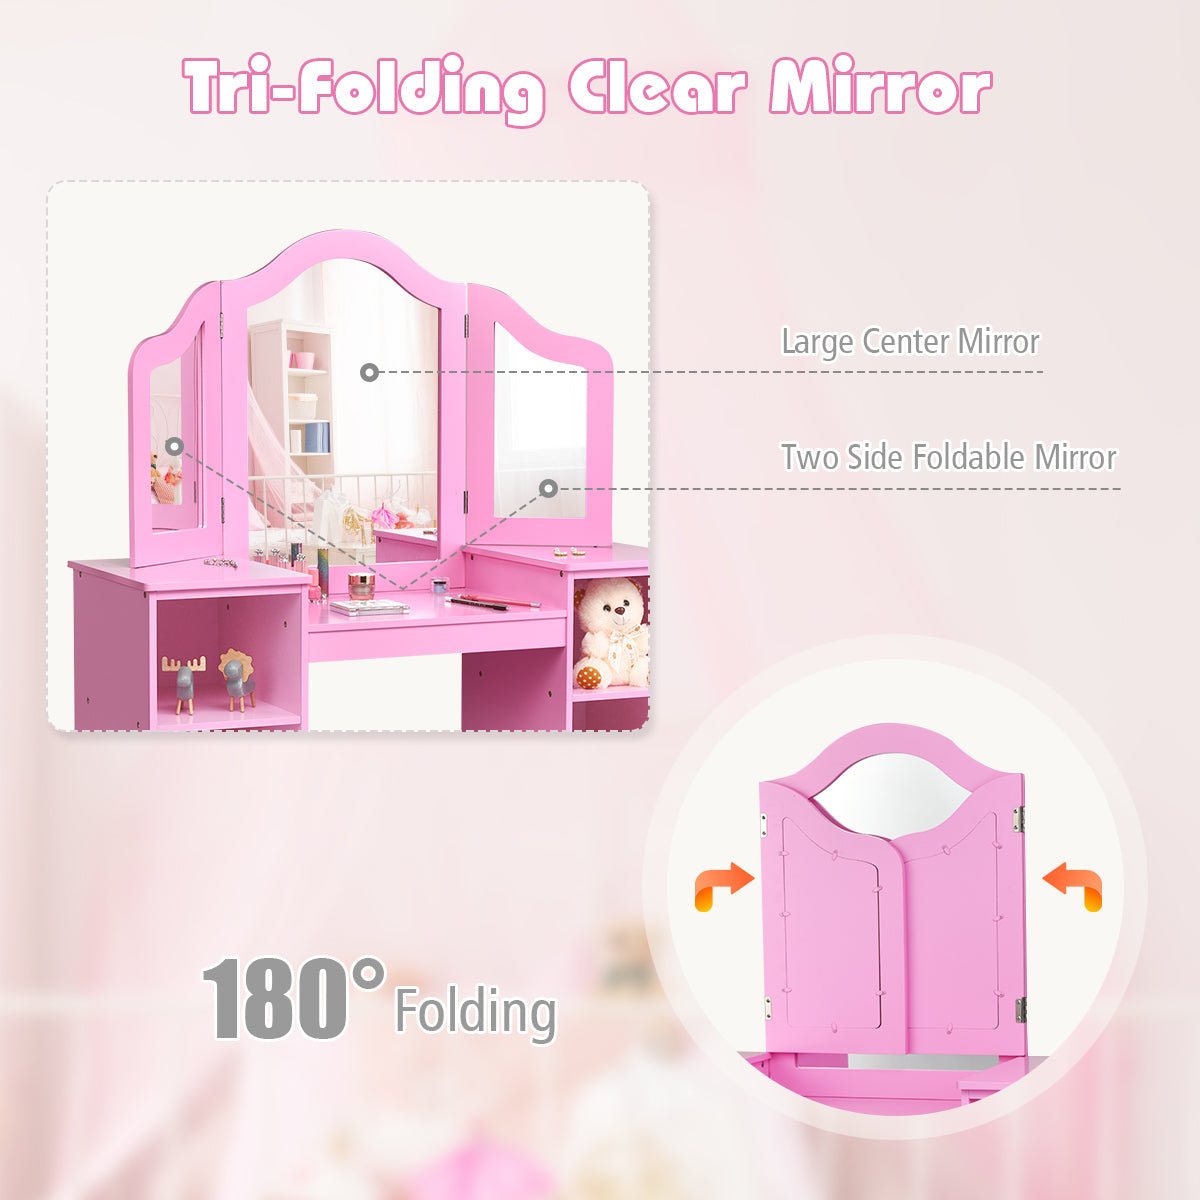 Removable Three-Panel Mirror: Three-Panel mirror provides a clear view for kids. And sitting in the position, kids can see their own appearance more comprehensively. At the same time, the top of the dressing table can be removed and your child can use it as a writing desk if necessary. This 2 in 1 design is practical and save the space of your home.